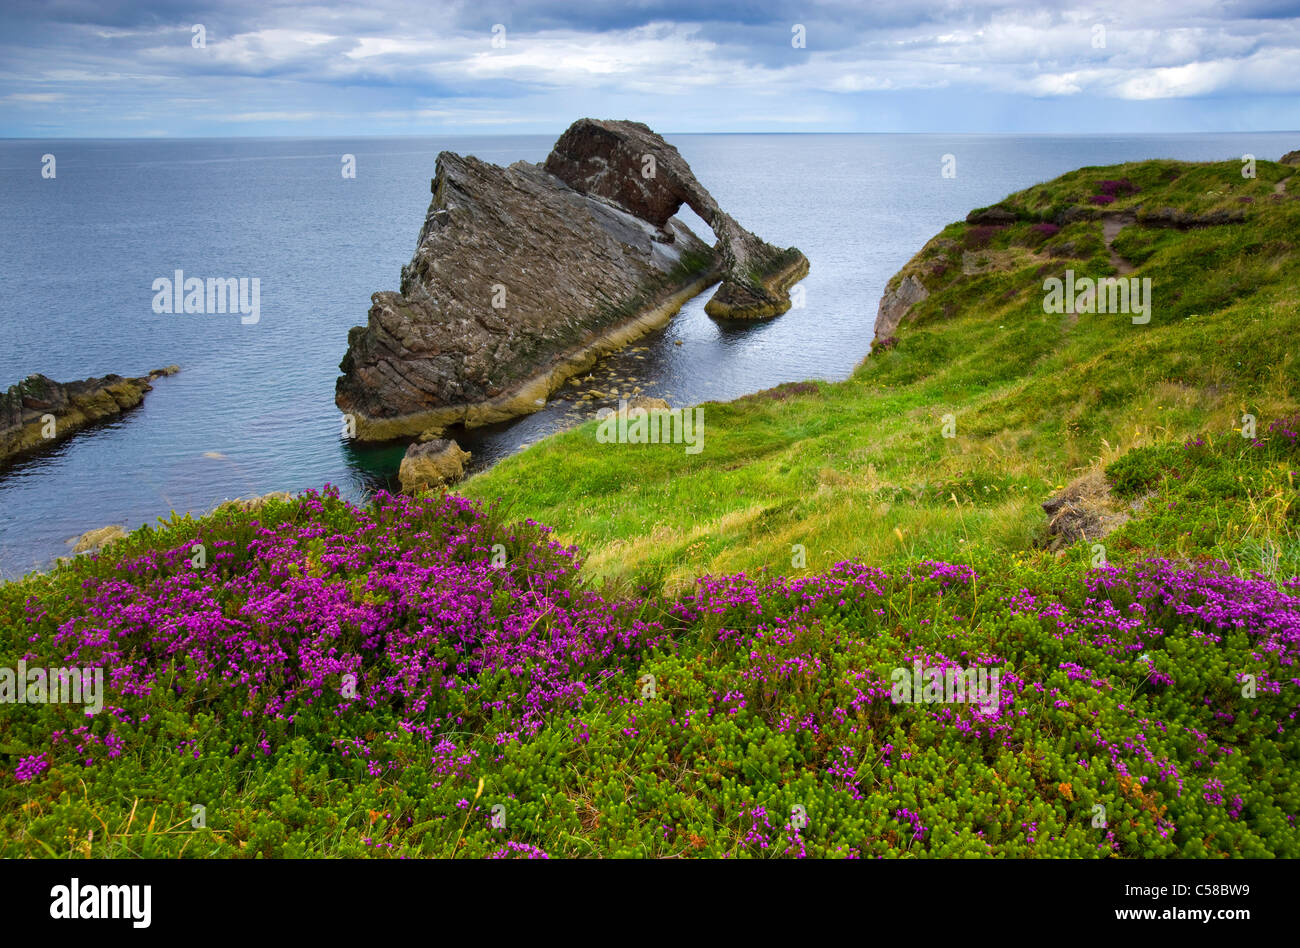 Bow Fiddle rock, skirt, Great Britain, Scotland, Europe, sea, coast, cliff coast, cliff forms, cliff curves, meadow, moor plants Stock Photo